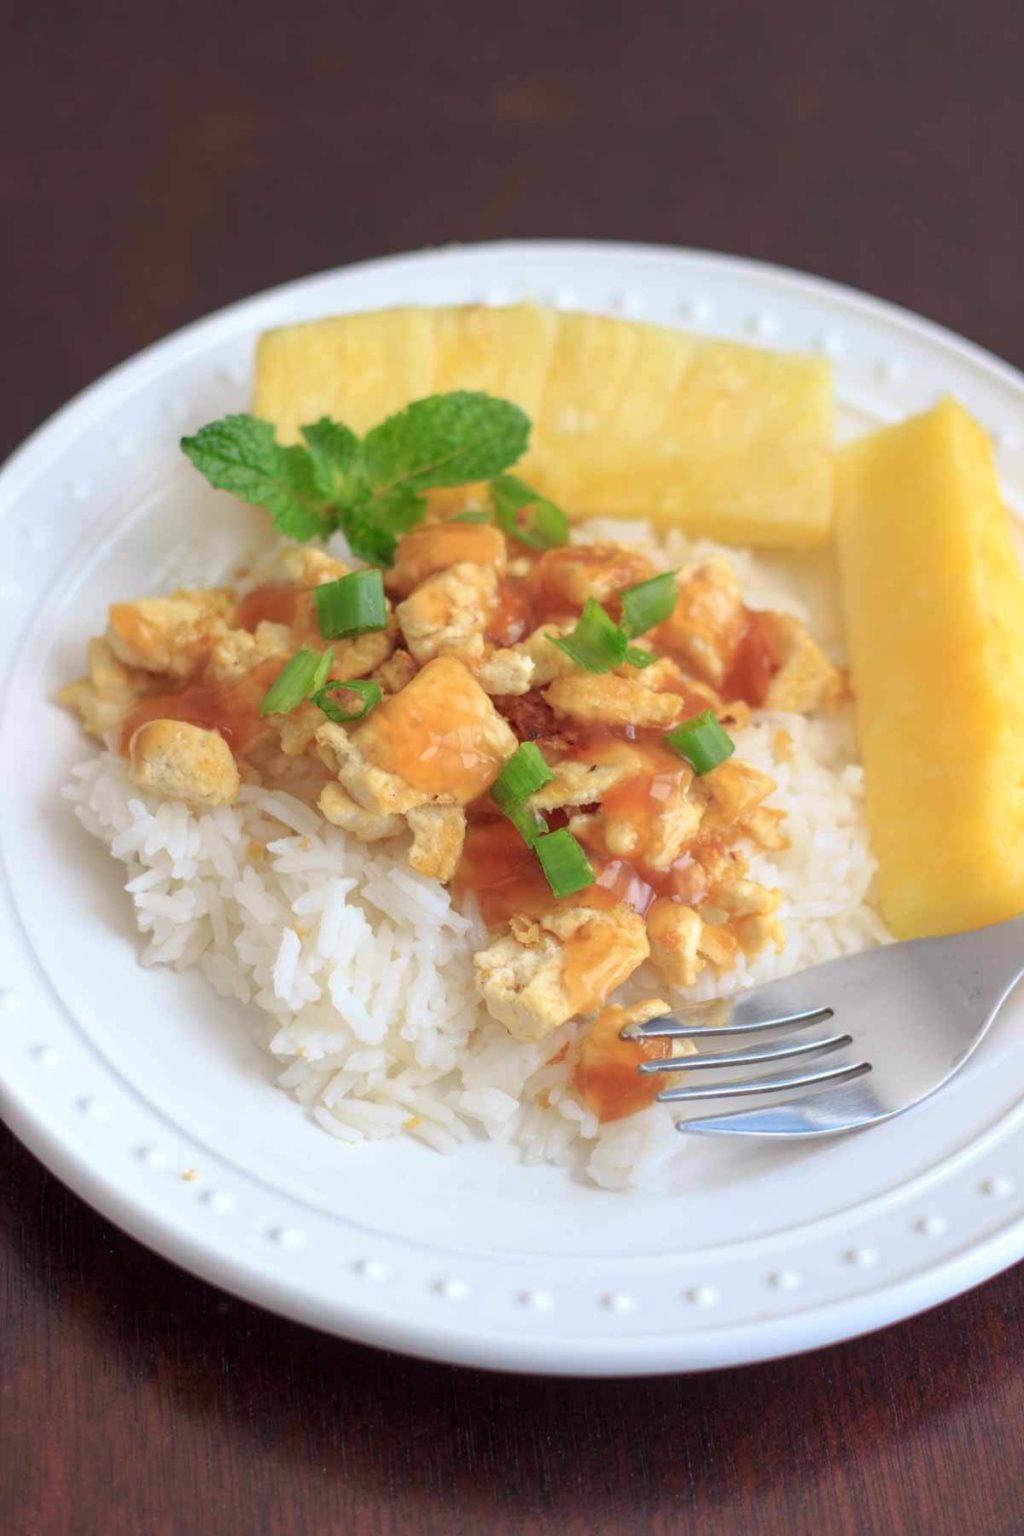 Pineapple Tofu - a vegan & gluten-free meal ready in 15 minutes with a tropical twist of pineapple and mint.